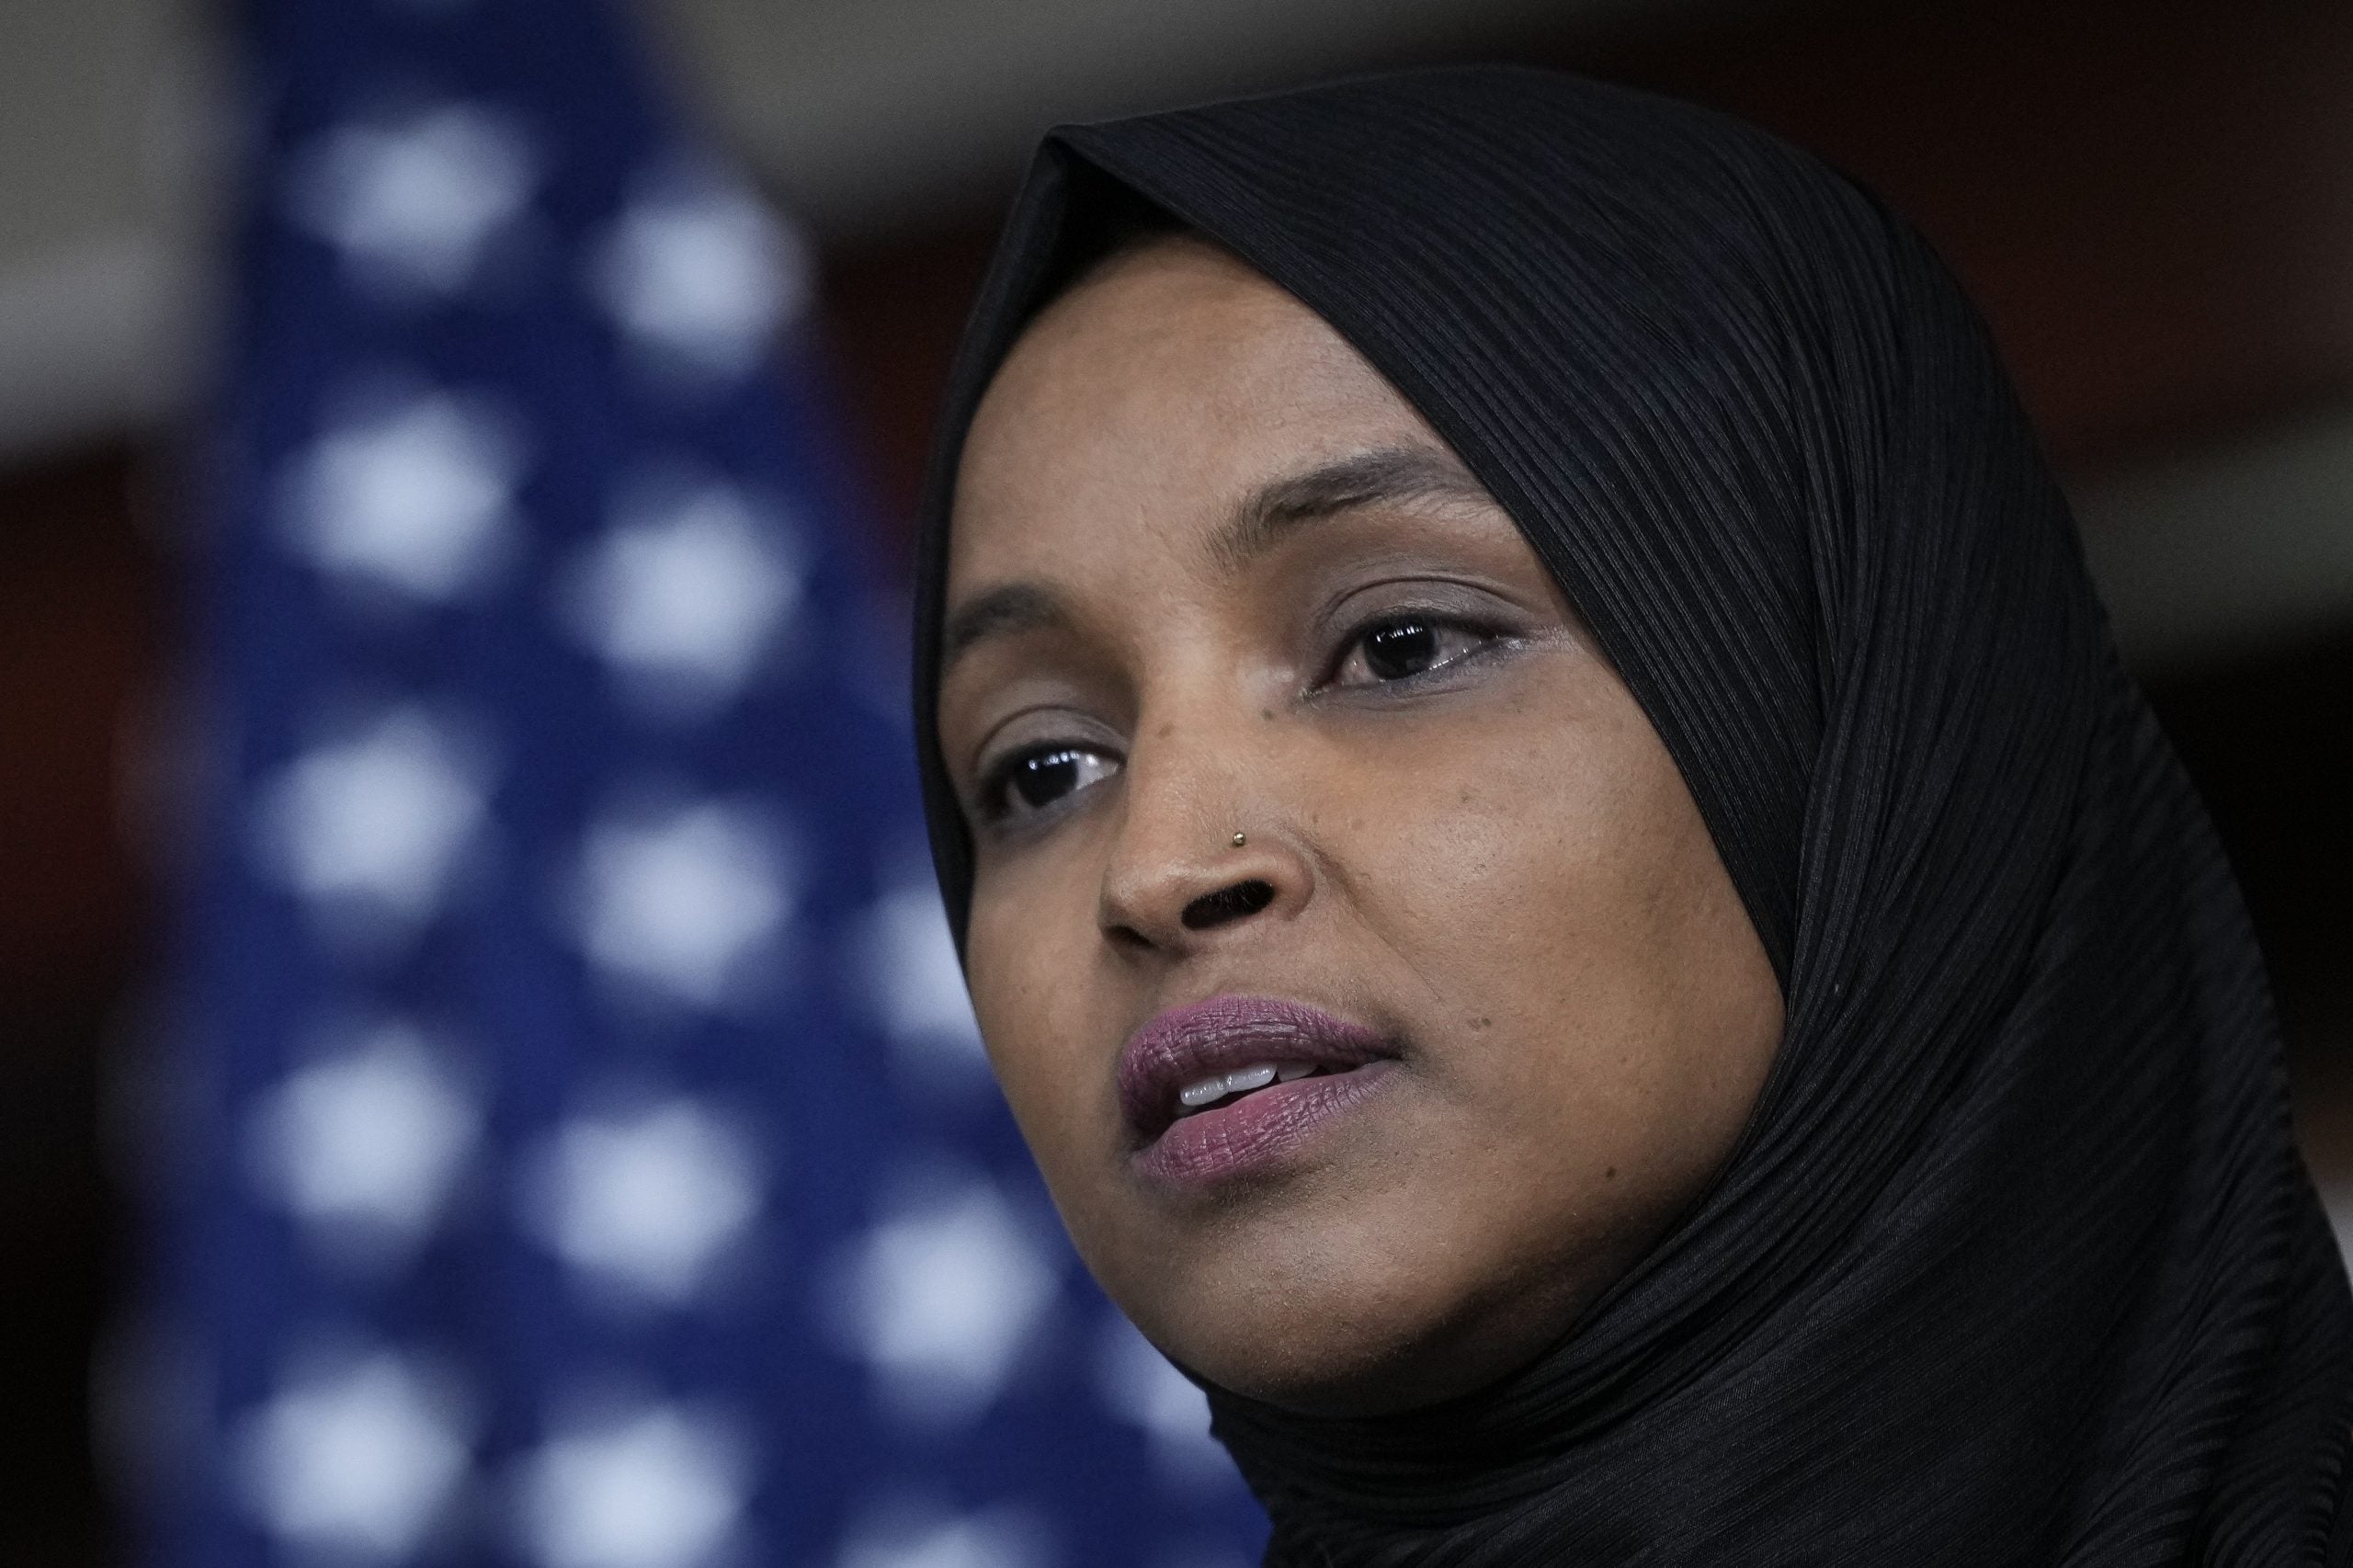 Rep. Ilhan Omar Expects House Leaders To Take “Decisive Action” Against Congresswoman Lauren Boebert For Anti-Muslim Remarks